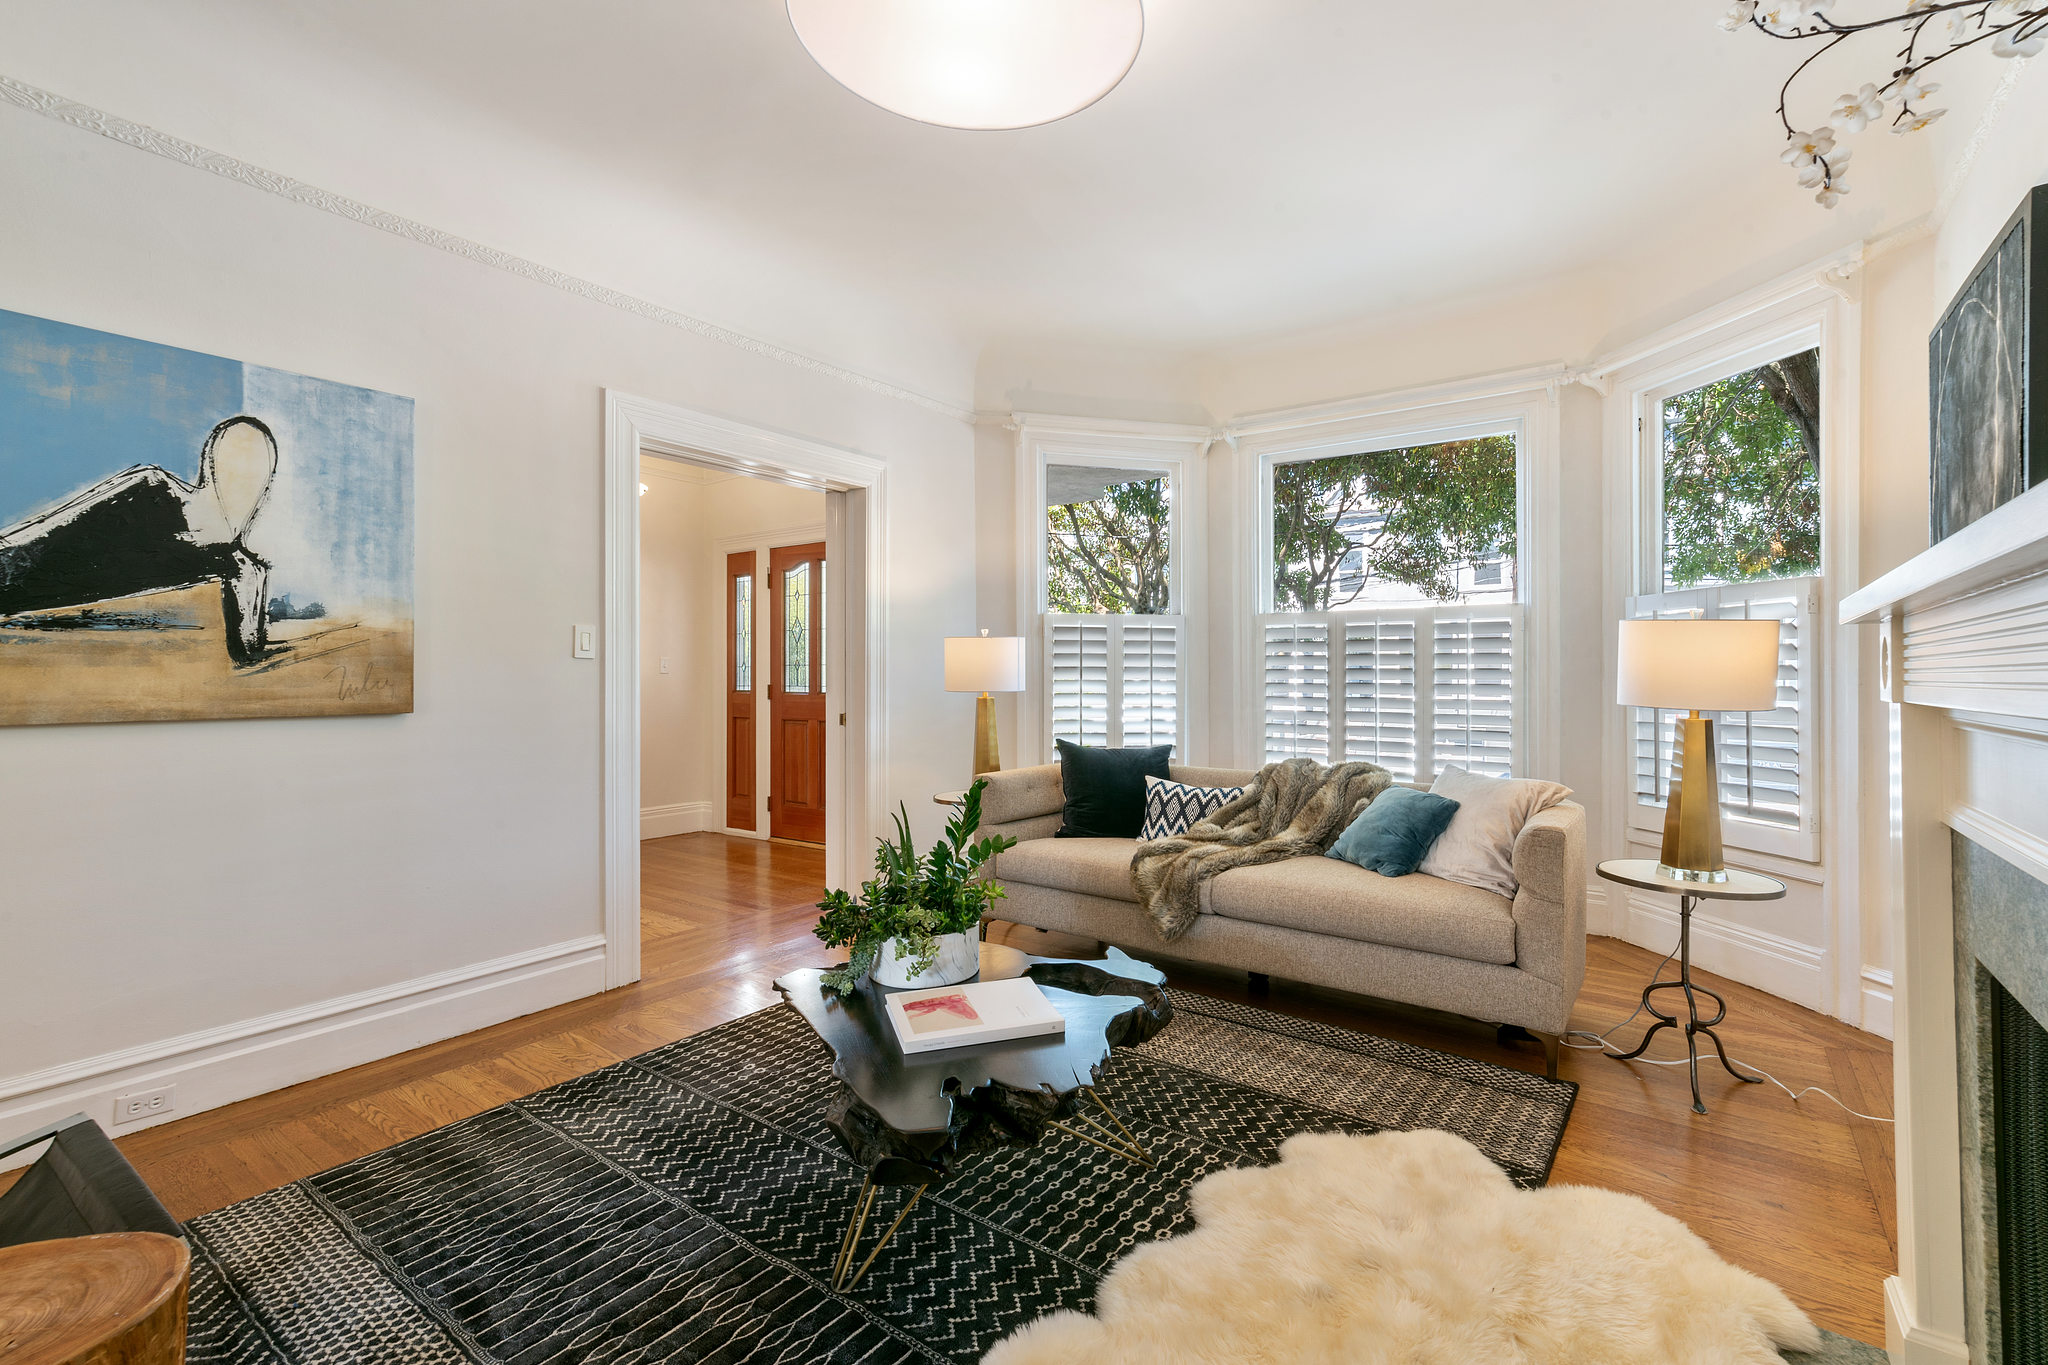 Property Photo: Living room showing bay windows and white woodwork 